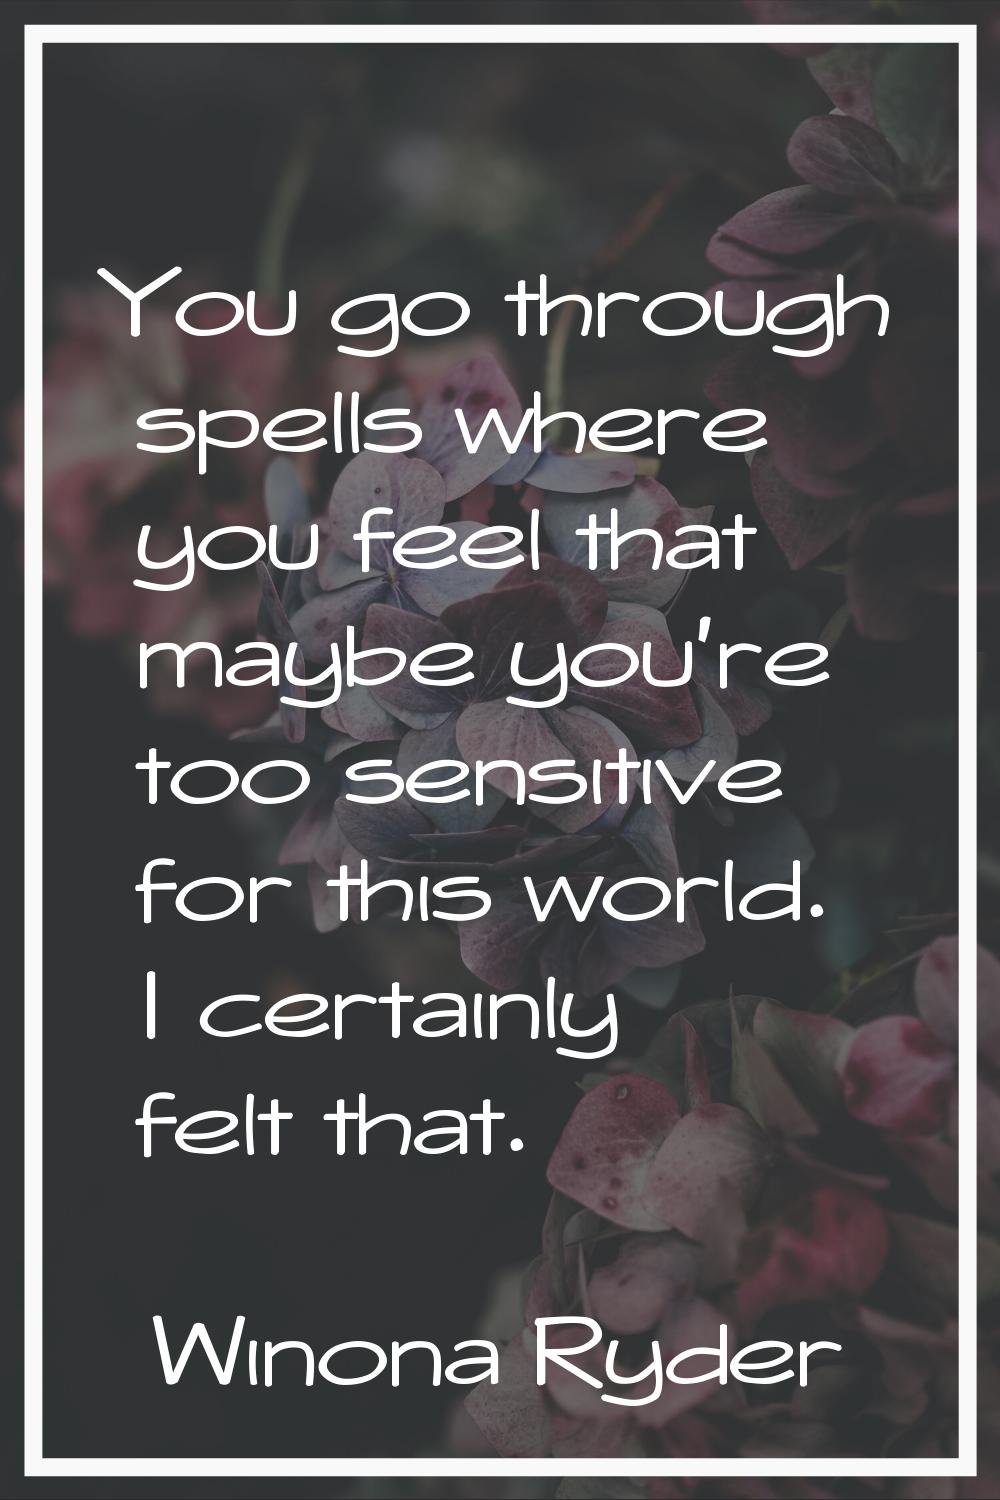 You go through spells where you feel that maybe you're too sensitive for this world. I certainly fe